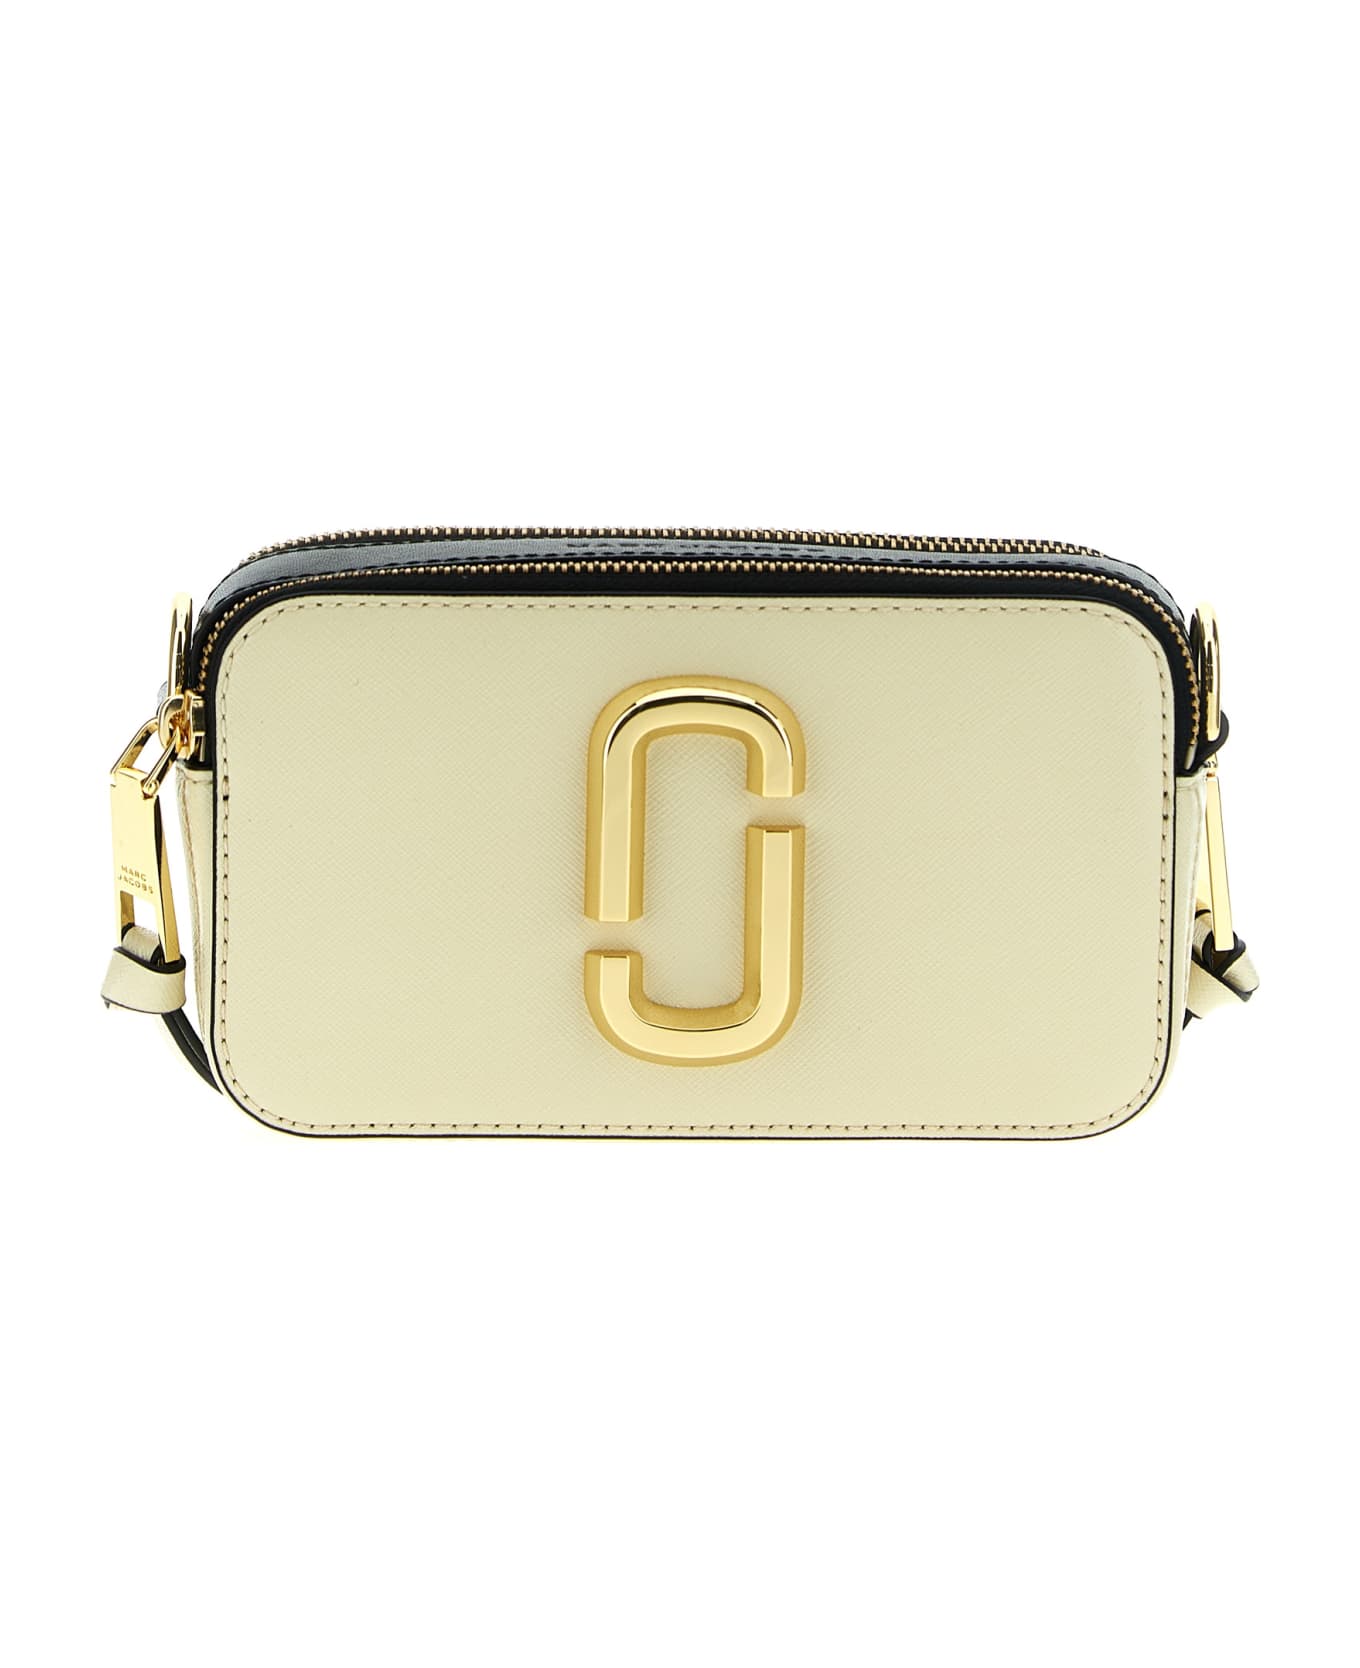 Marc Jacobs The Snapshot Leather Camera Bag - white